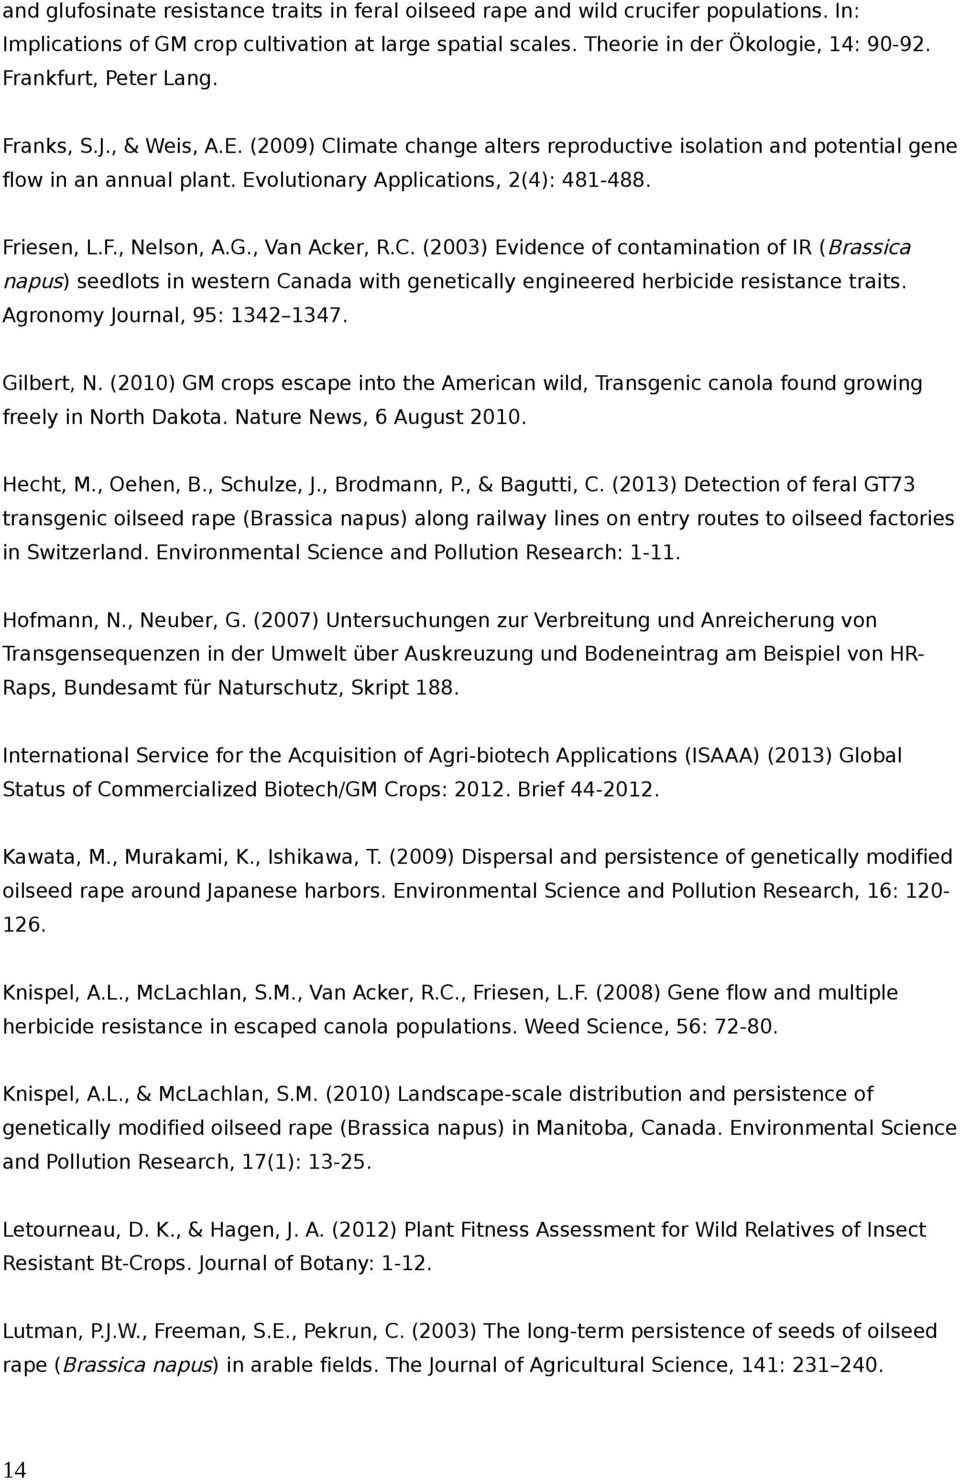 F., Nelson, A.G., Van Acker, R.C. (2003) Evidence of contamination of IR ( Brassica napus) seedlots in western Canada with genetically engineered herbicide resistance traits.